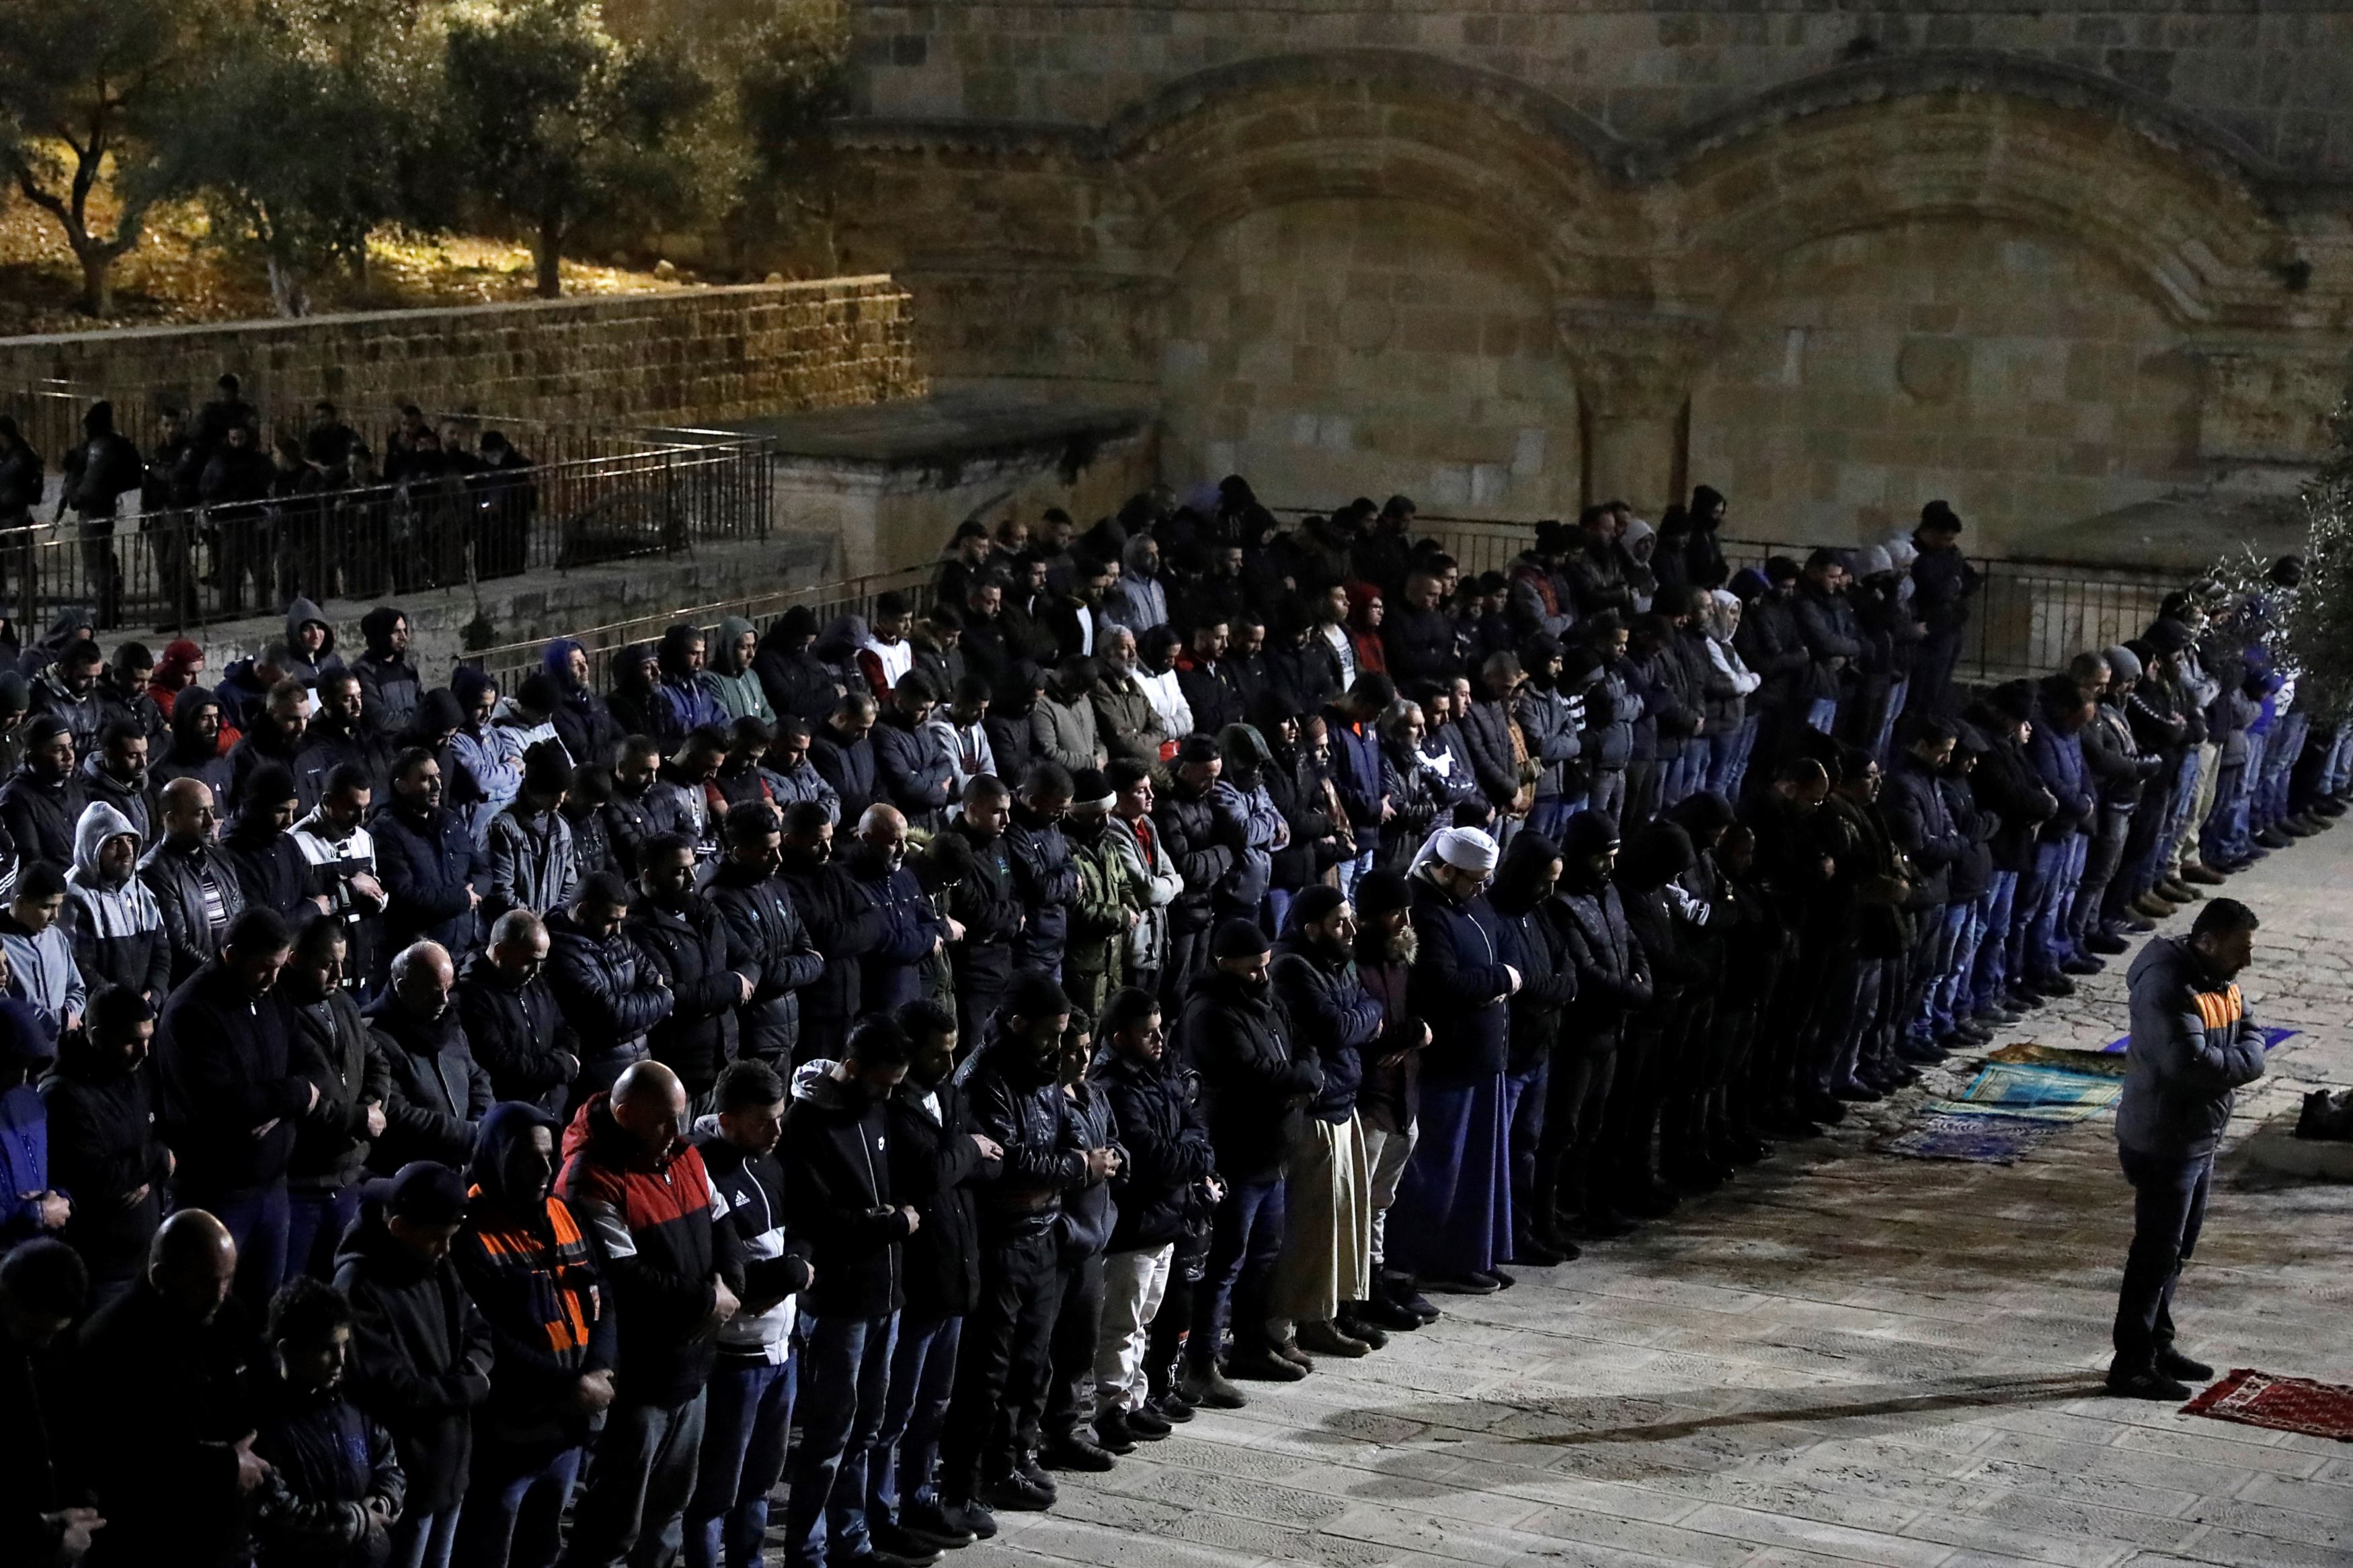 Palestinians pray near al-Rahmeh Gate in the Al-Aqsa mosque compound in Jerusalem on 20 February 2019 (AFP)